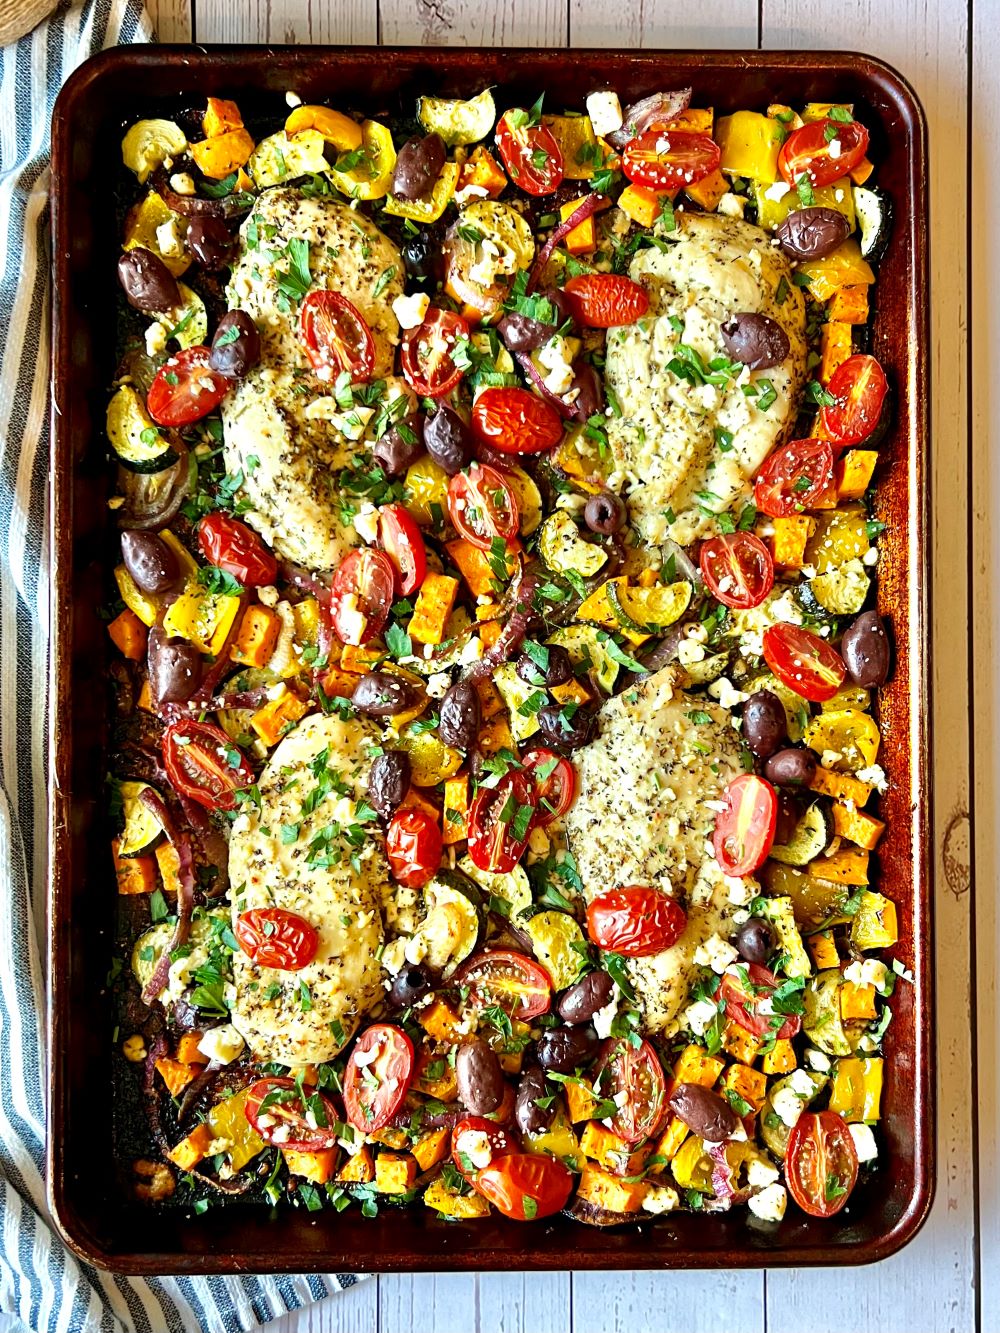 Chicken and veggies roasted on a sheet pan.